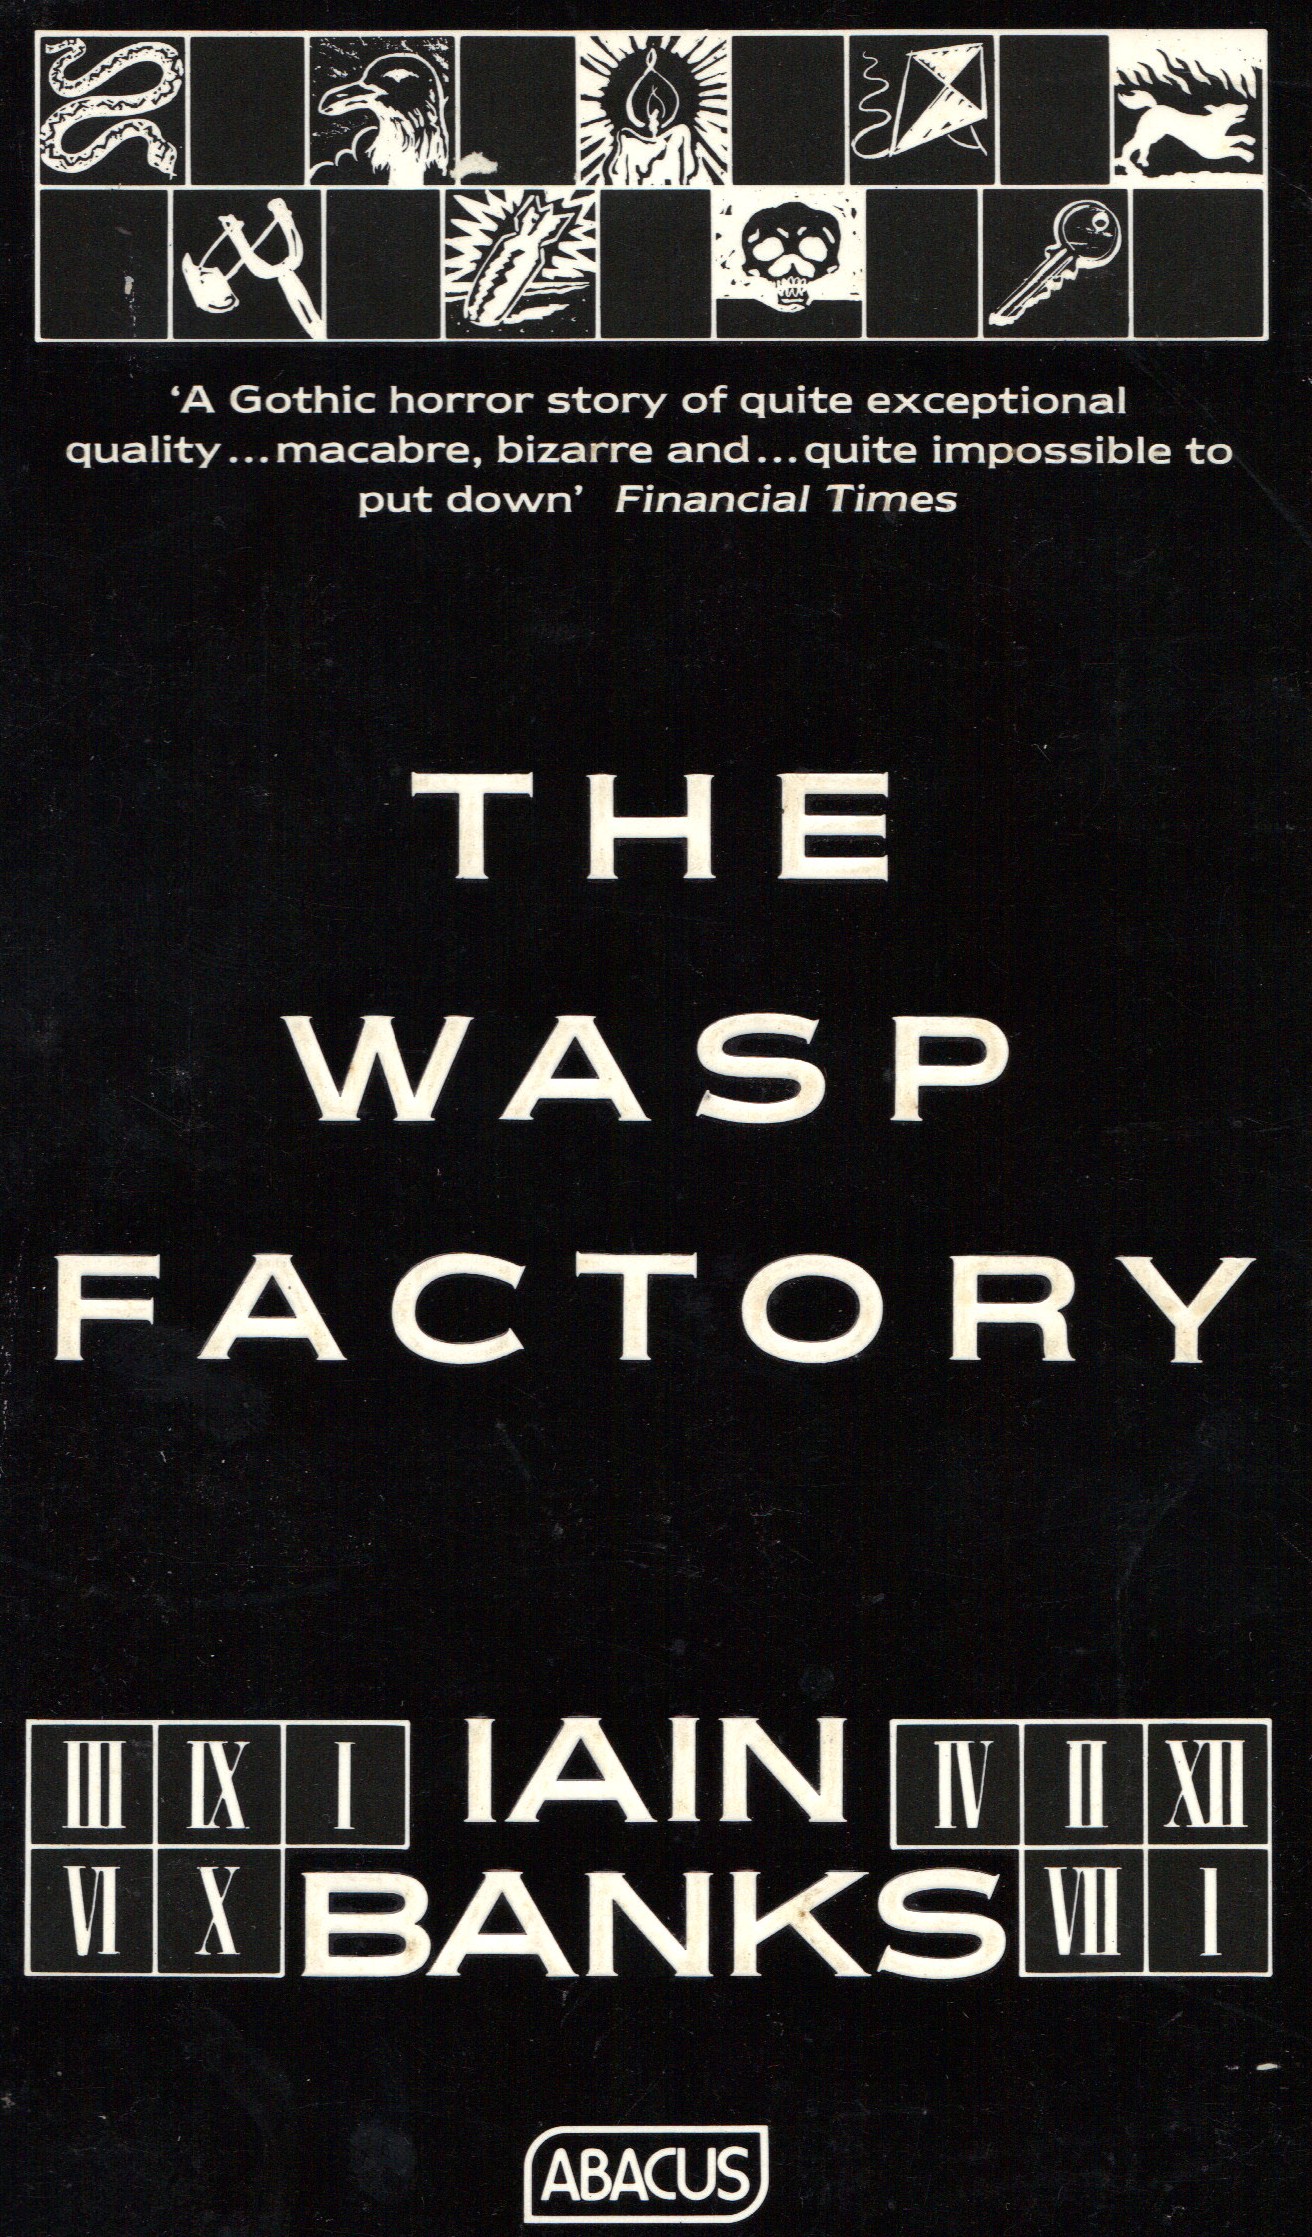 the wasp factory by iain banks